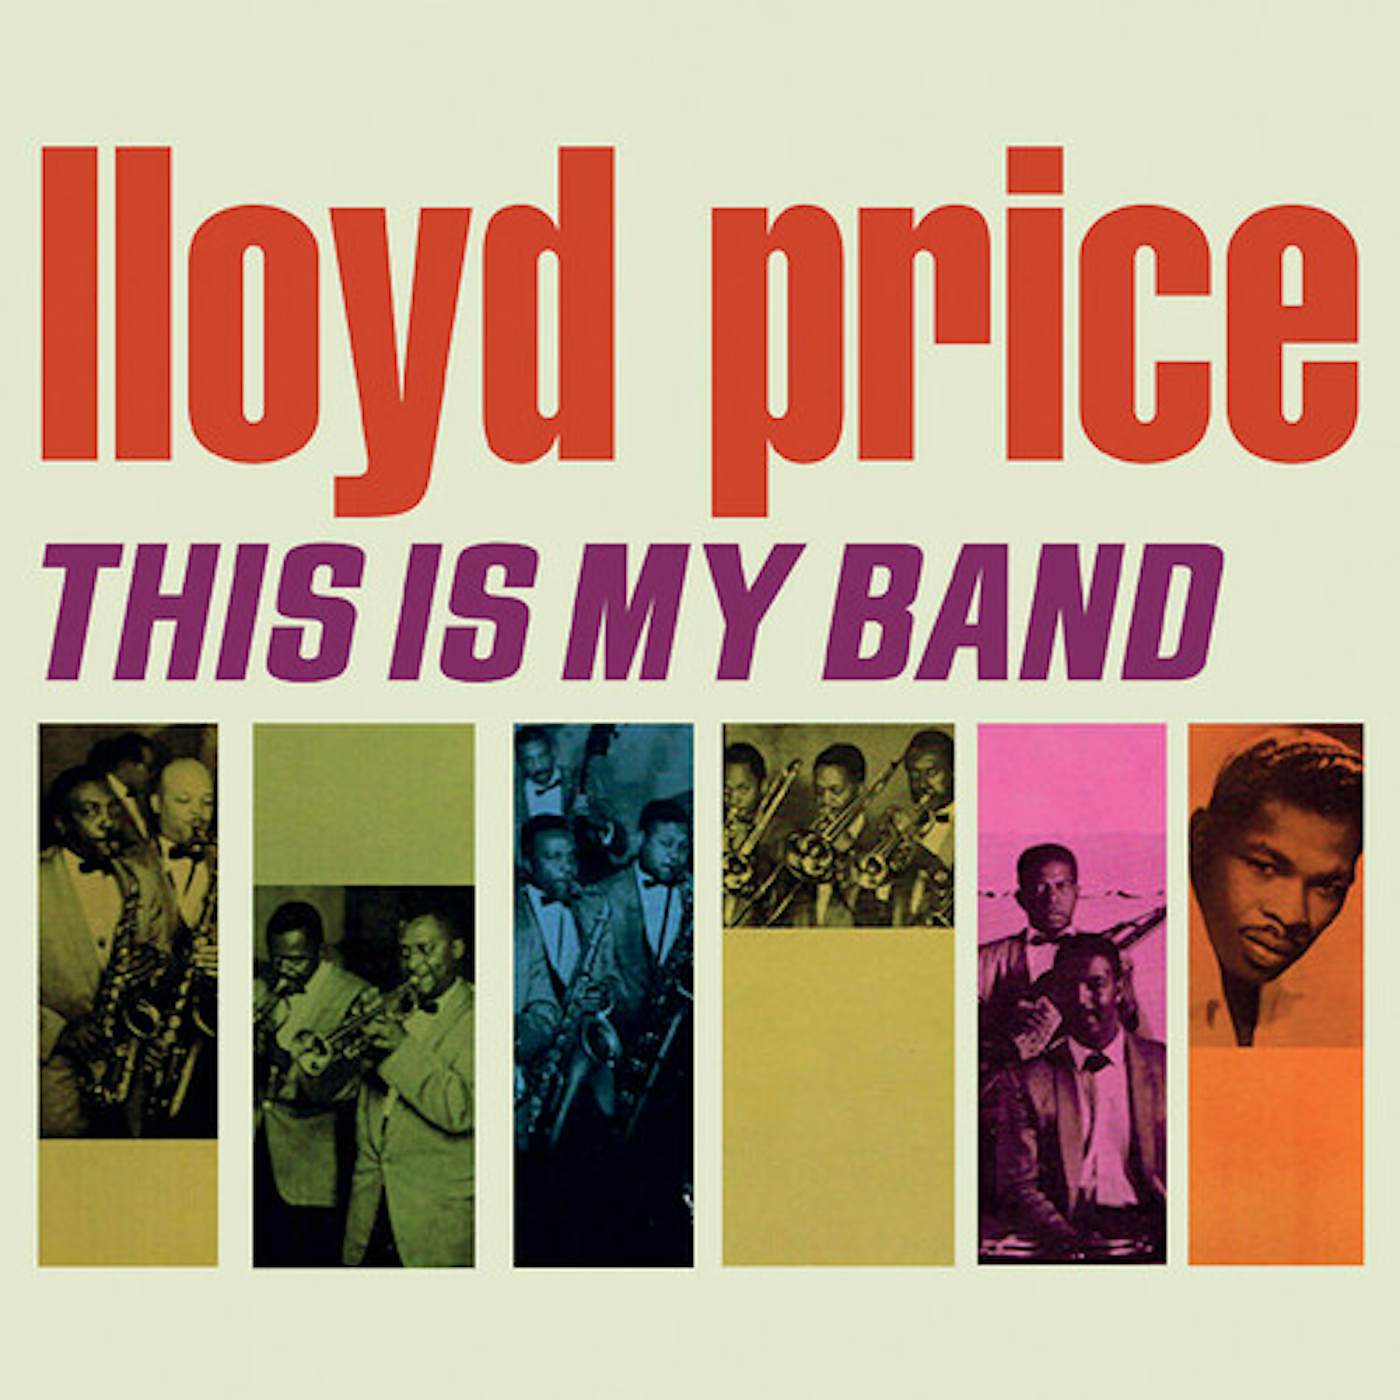 Lloyd Price THIS IS MY BAND CD